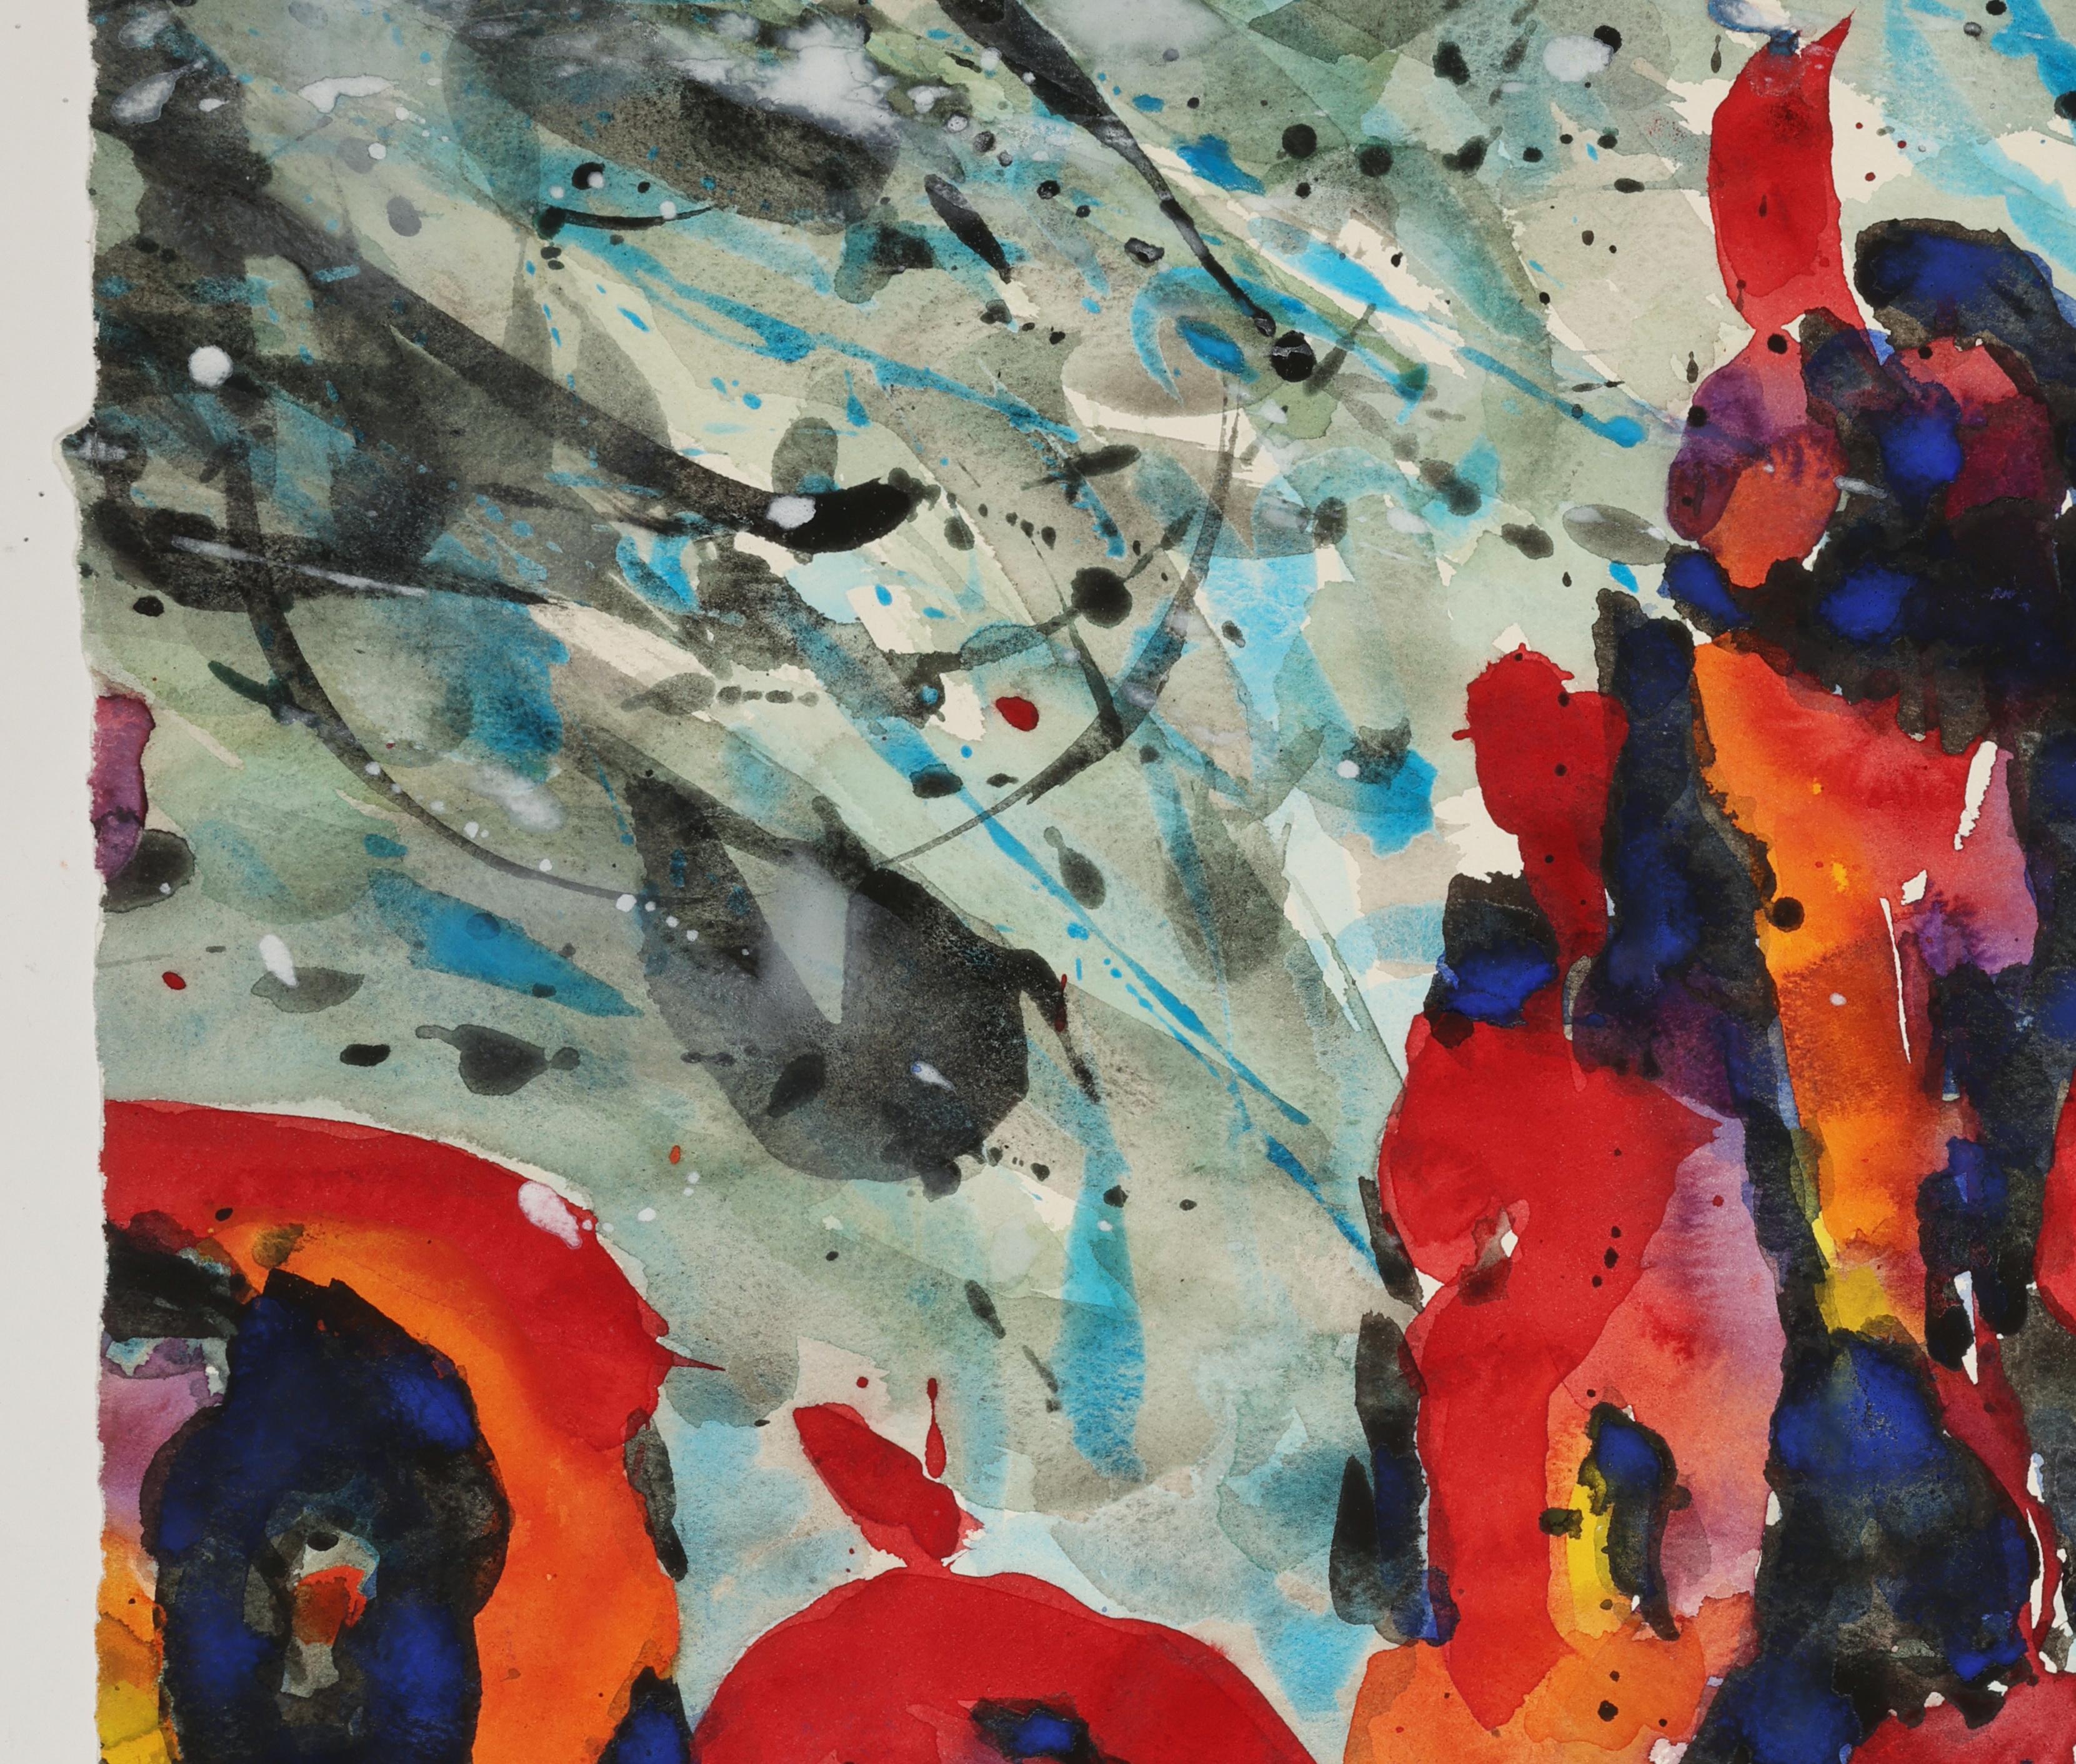 Abstract Watercolor Painting, 'Design for Land', C. 1997 by David Ruth For Sale 3